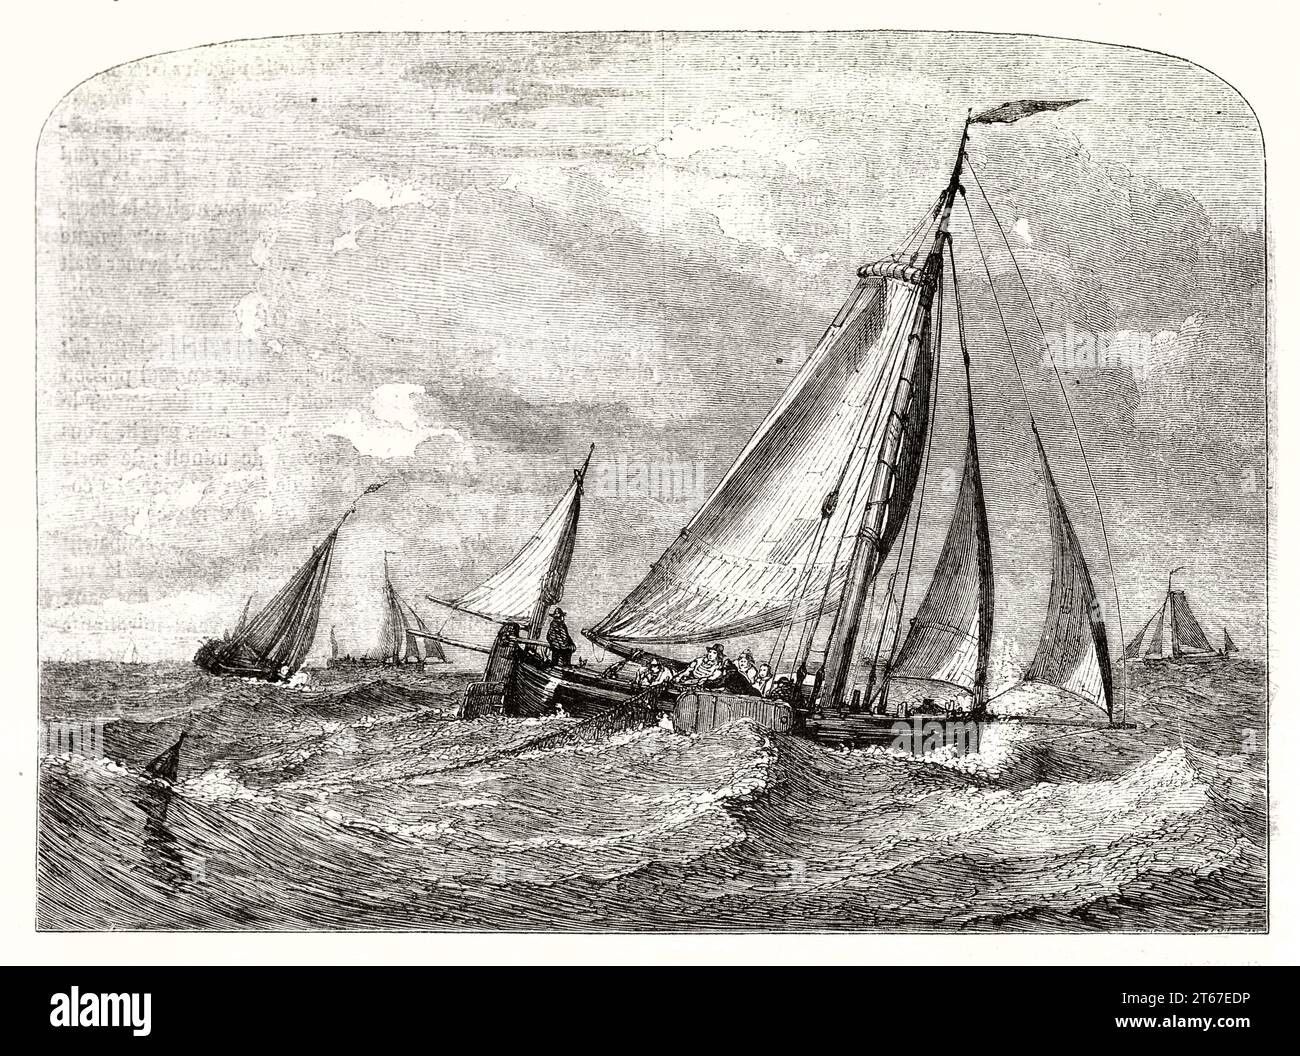 Old illustration of fishing boats on the Dogger Bank, North sea. By Linton,  publ. on Magasin Pittoresque, Paris, 1851 Stock Photo - Alamy